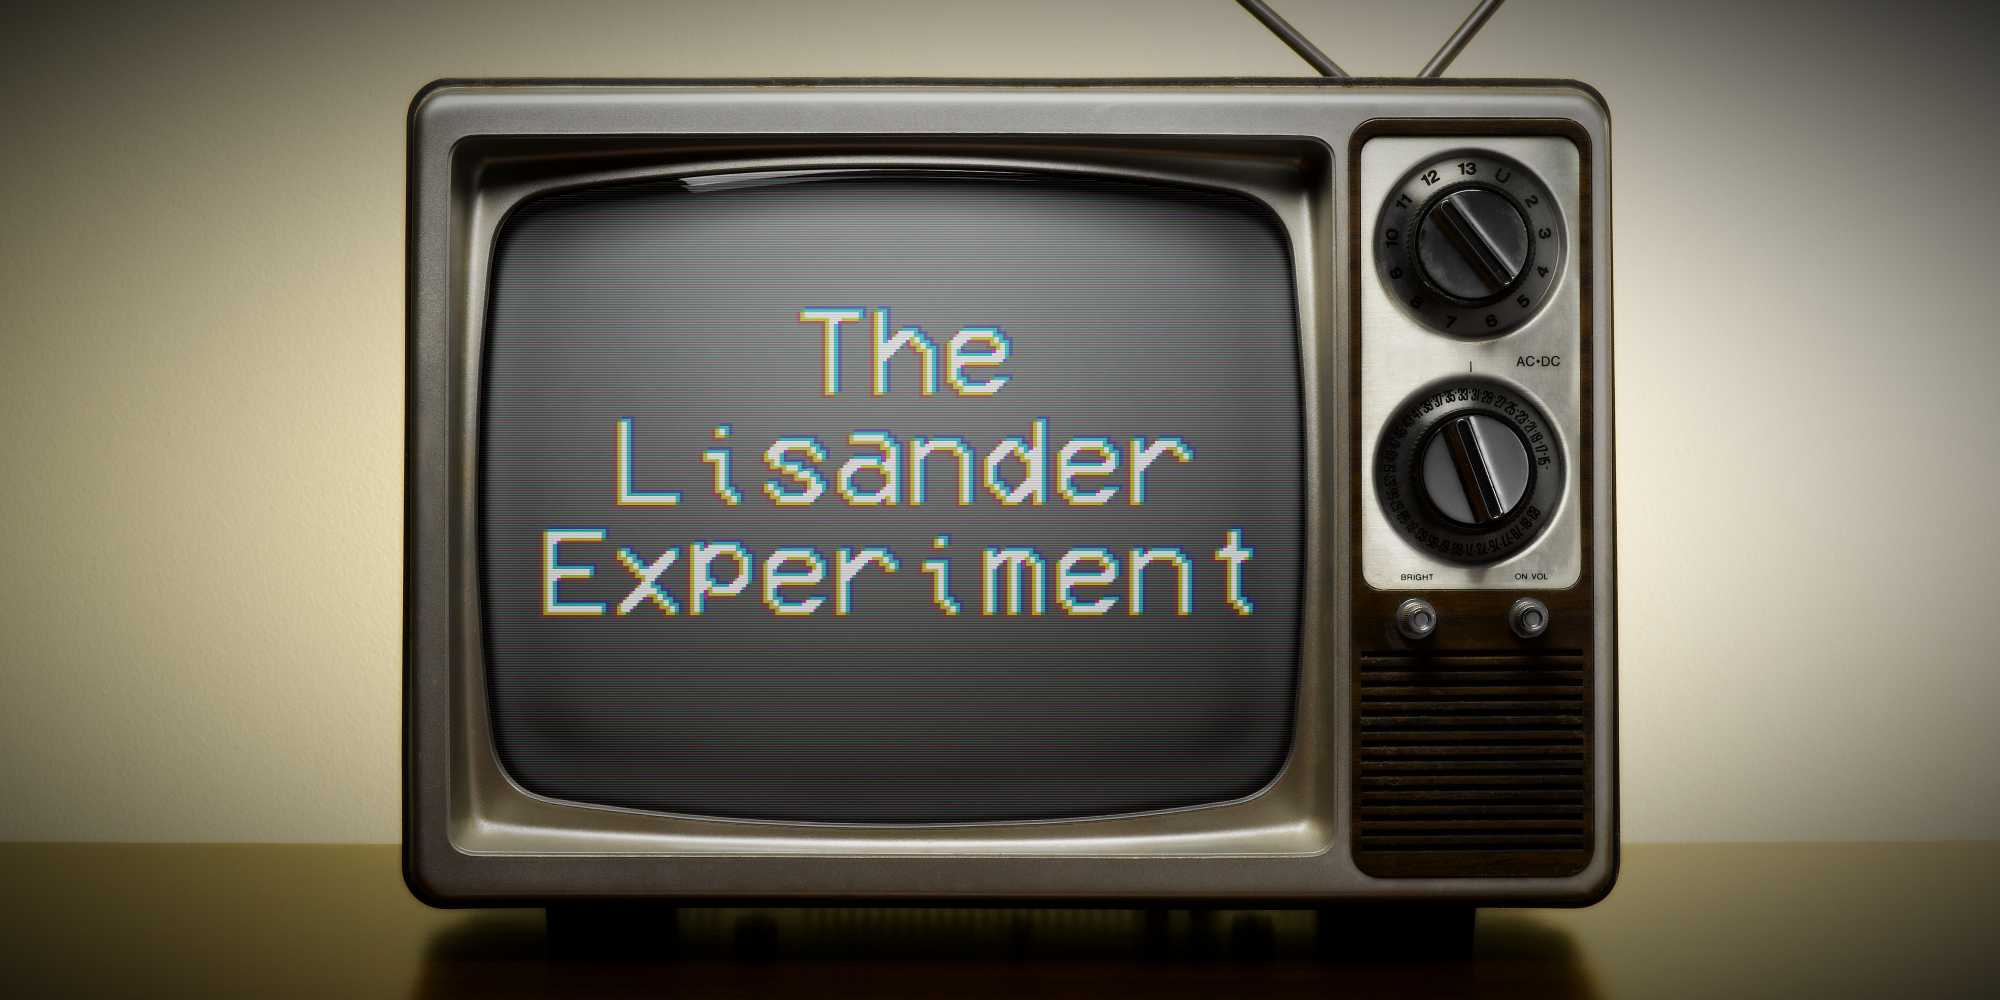 The Lisander Experiment